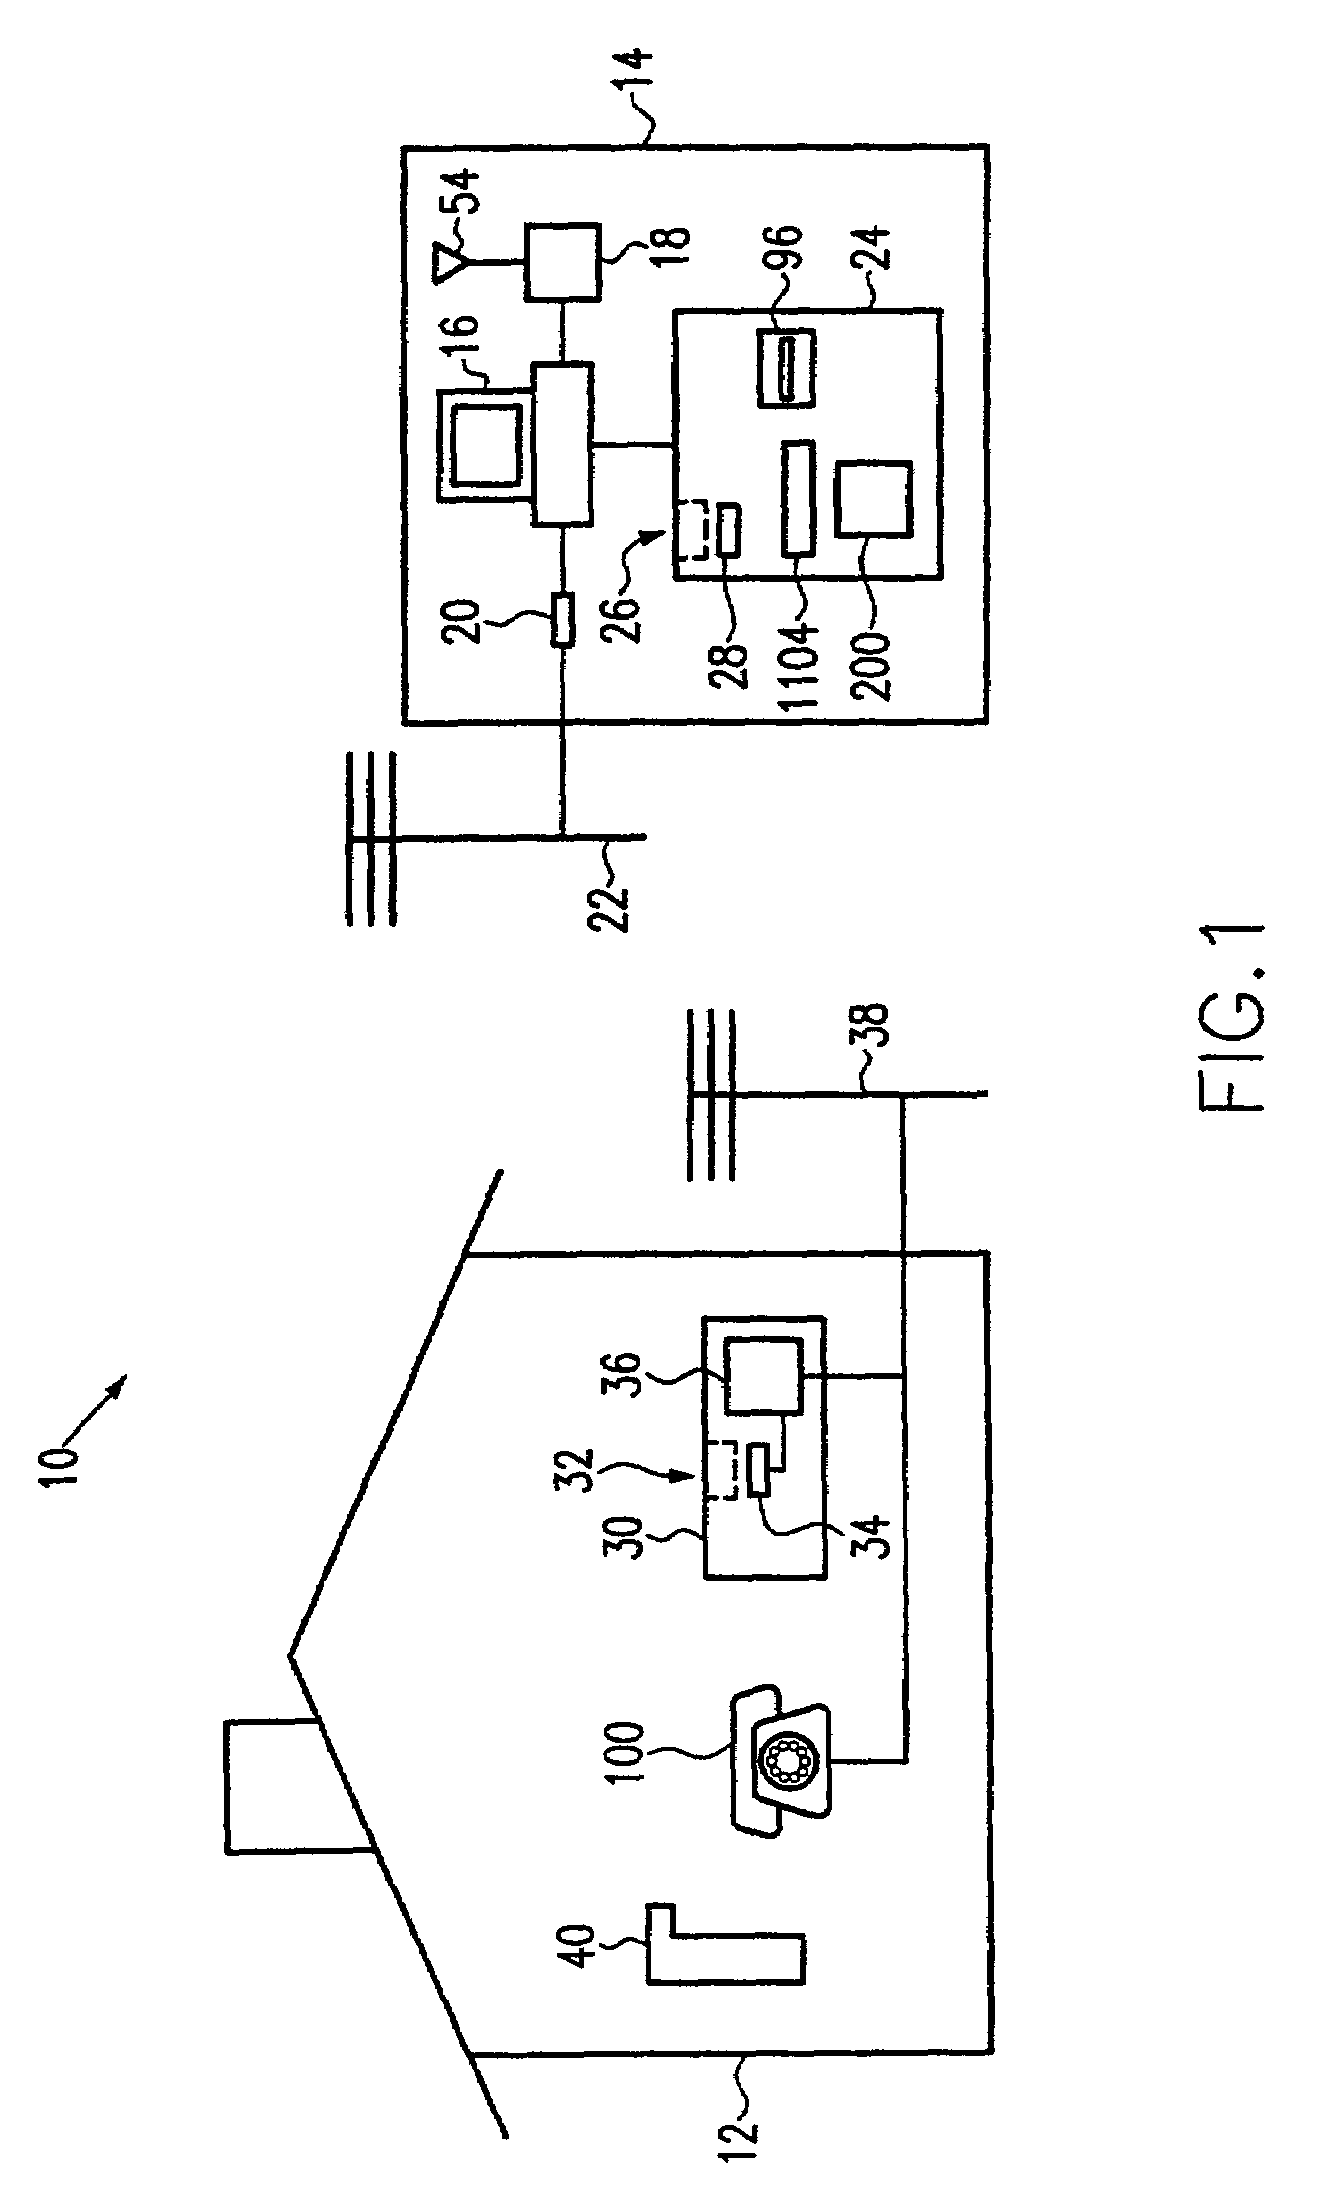 Portable electronic terminal and data processing system